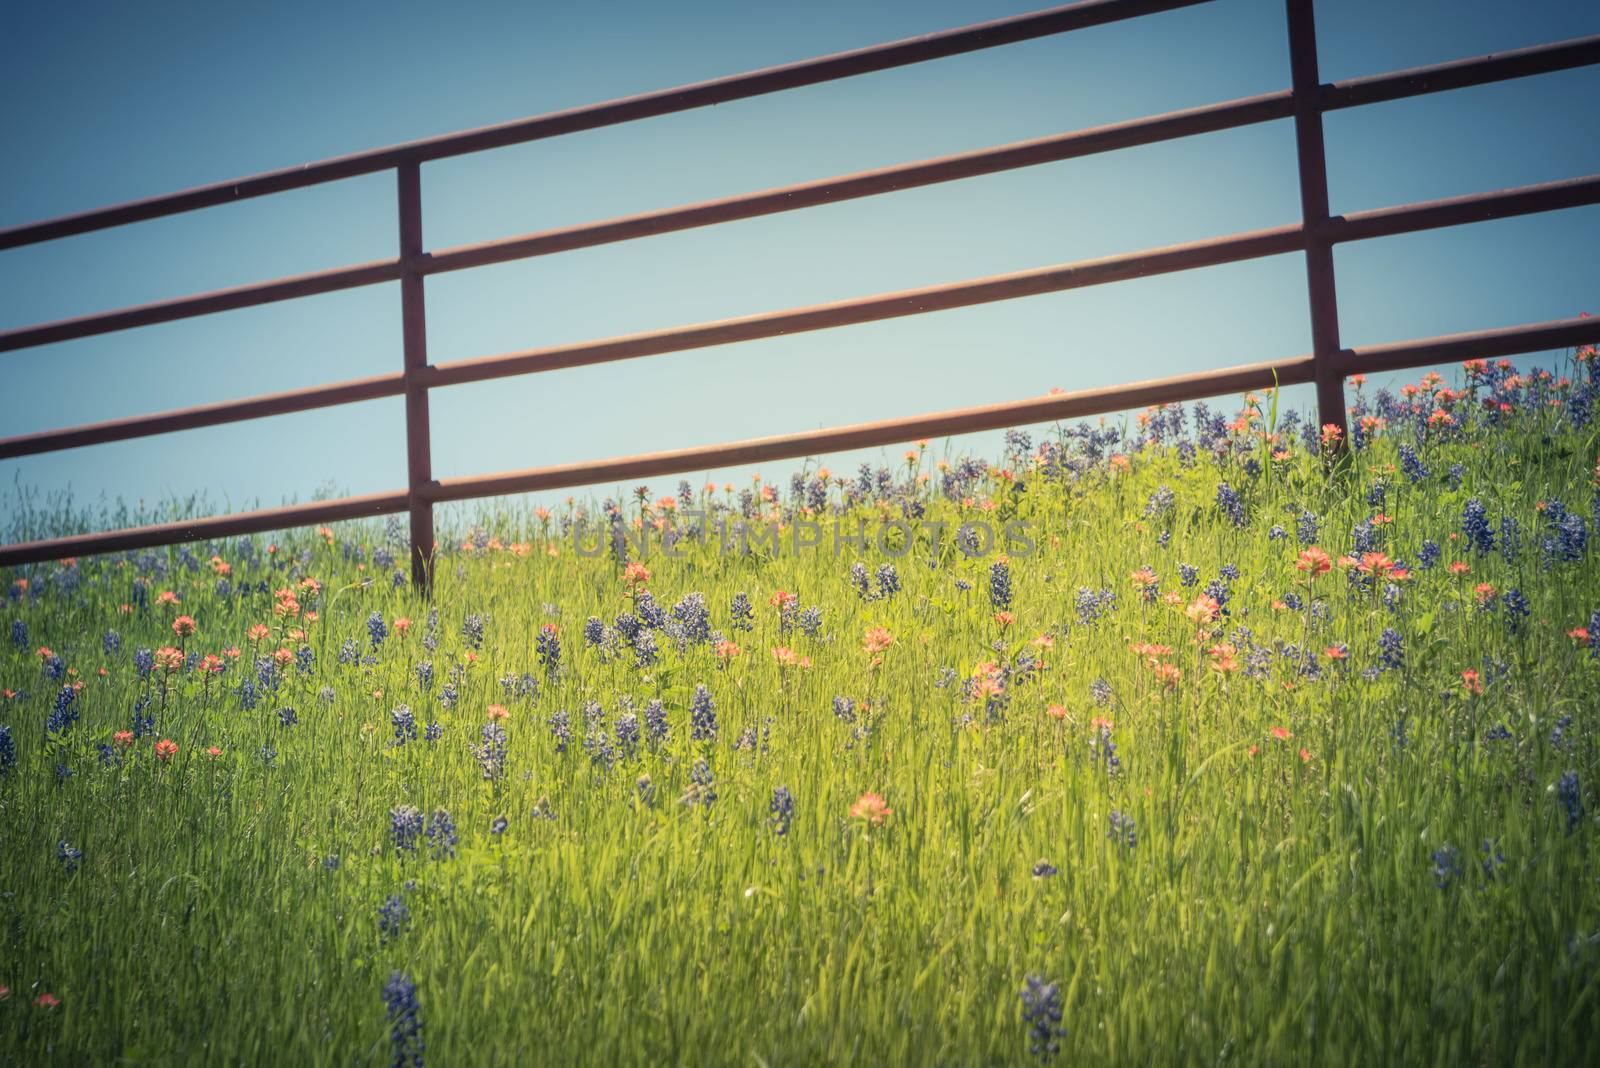 Vintage tone rustic metal fence with Indian Paintbrush DescriptionCastilleja foliolosa and Bluebonnet blooming. Wildflower meadow blossom in springtime at farm in Bristol, Texas, USA